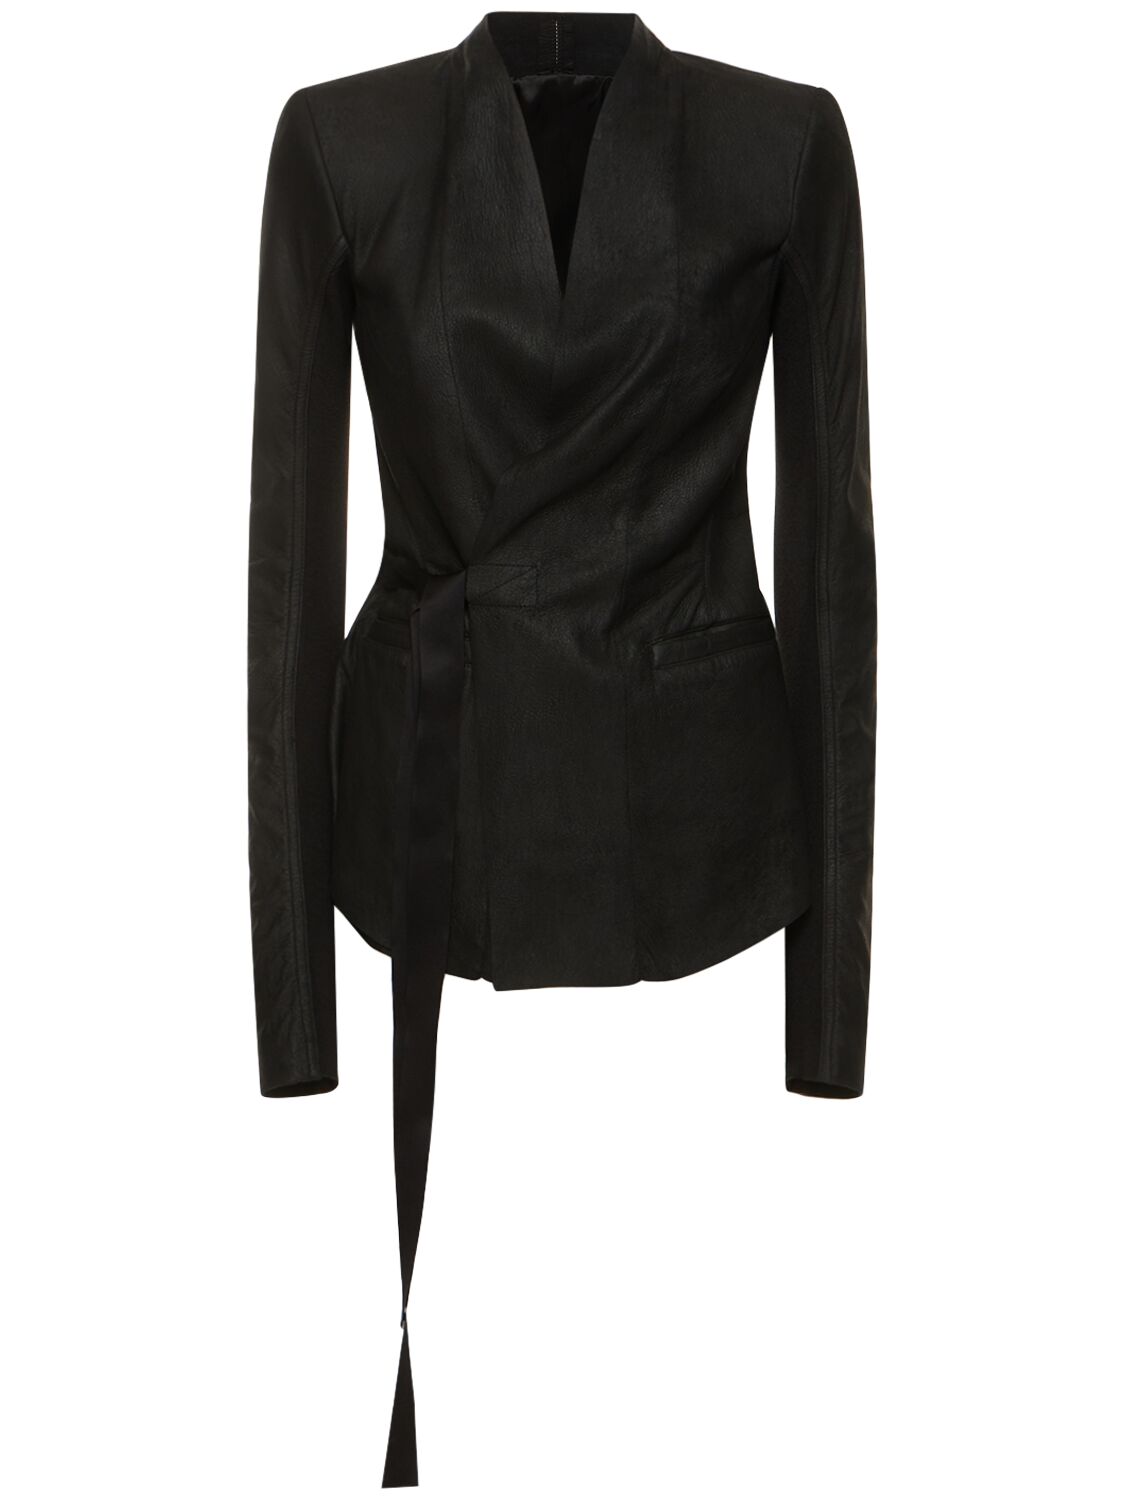 Image of Hollywood Leather Self-tie Jacket